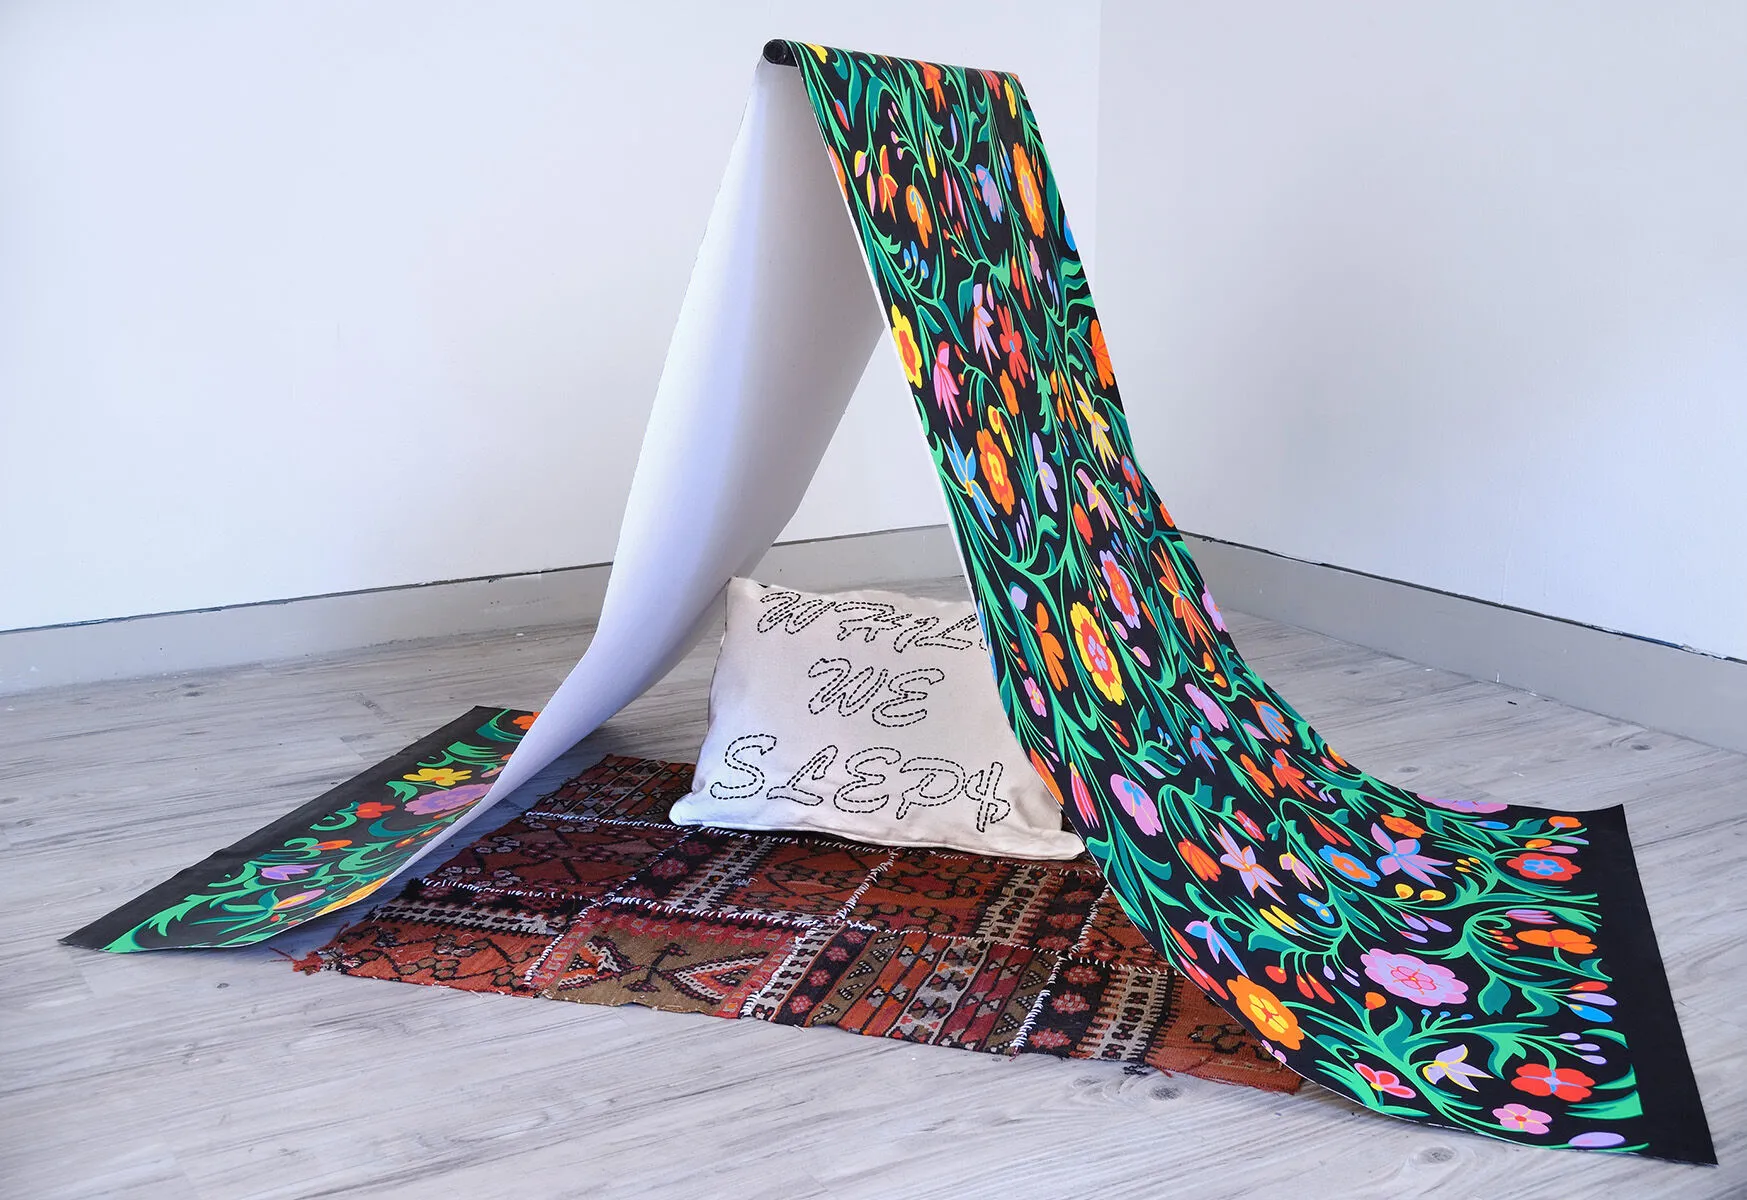 "HomeLoss" - A canvas painted with a colorful acrylic pattern on cavas; it is held up like a tent, under it is a Persian rug and a pillow that reads "we sleep here"